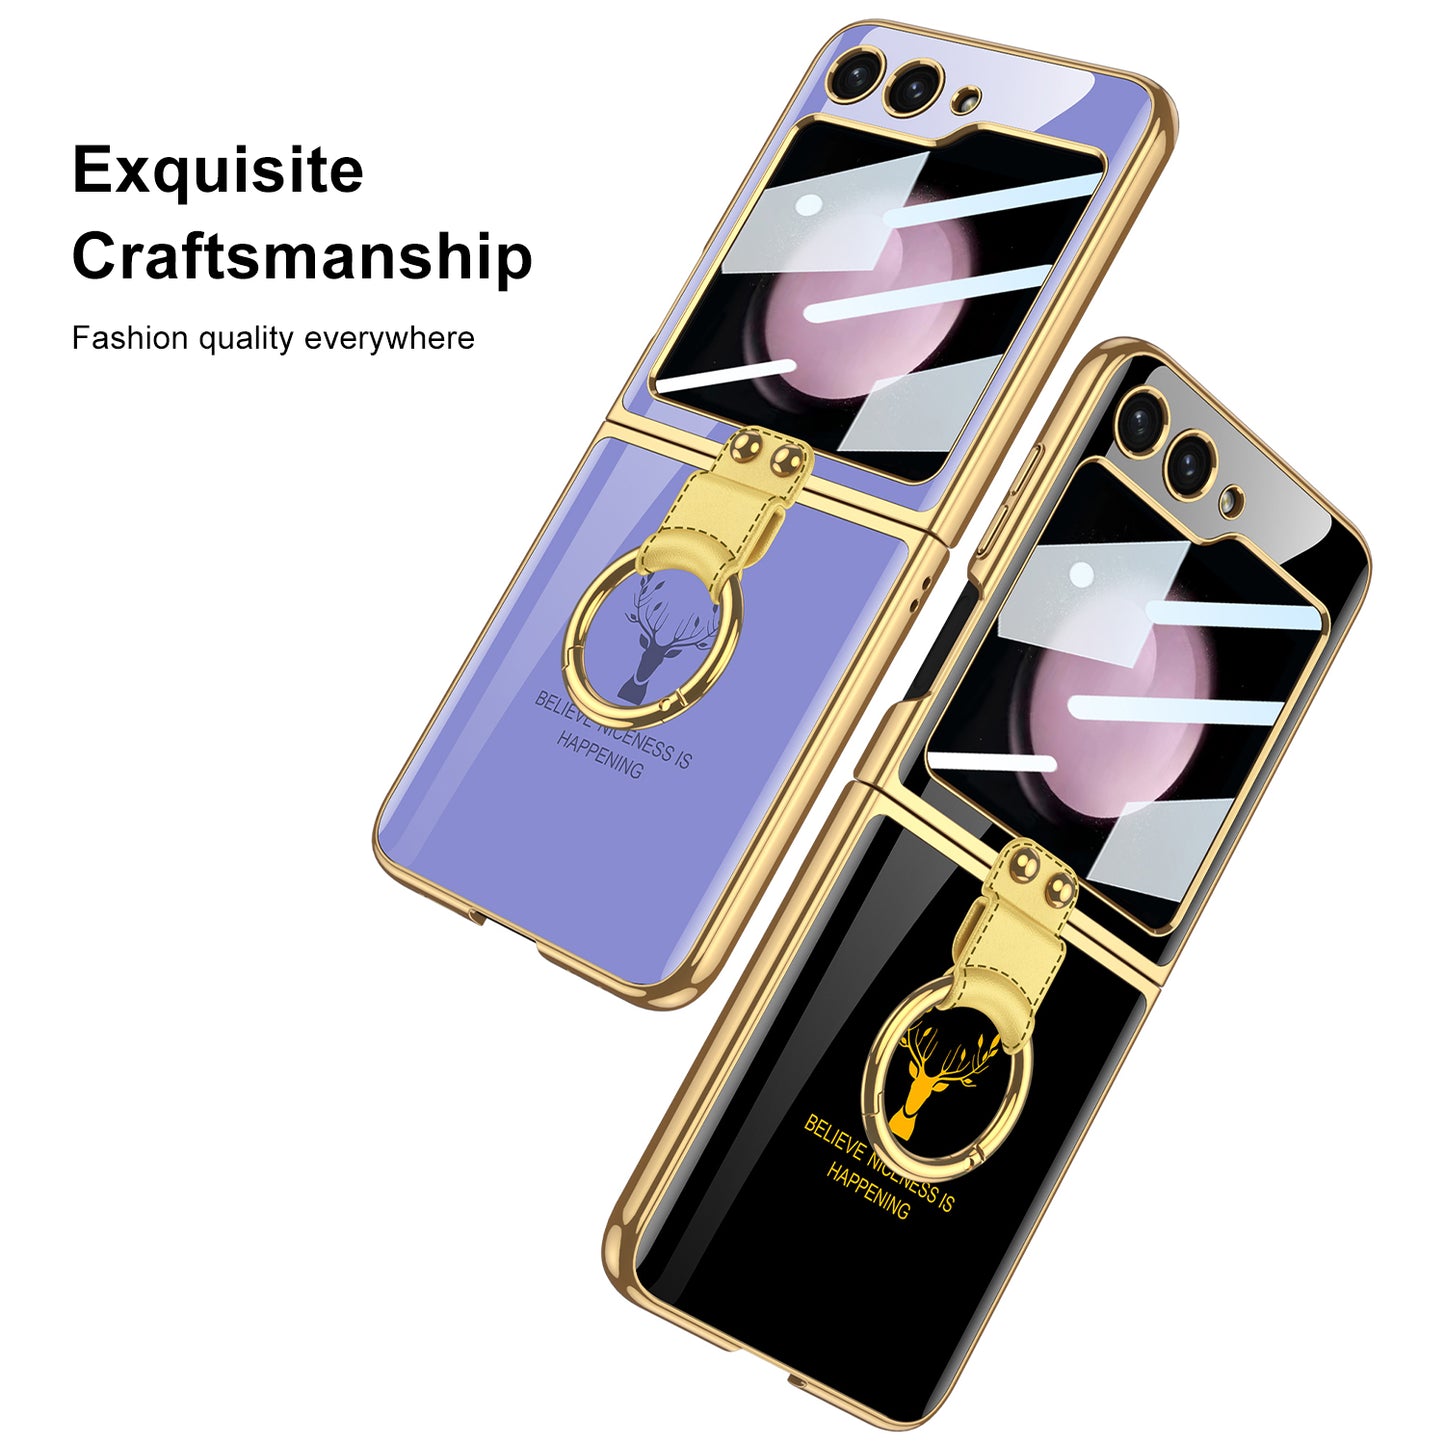 Electroplating Ring Holder Drop-proof Phone Case With Back Screen Protector For Samsung Galaxy Z Flip5 Flip4 Flip3 - Mycasety Mycasety